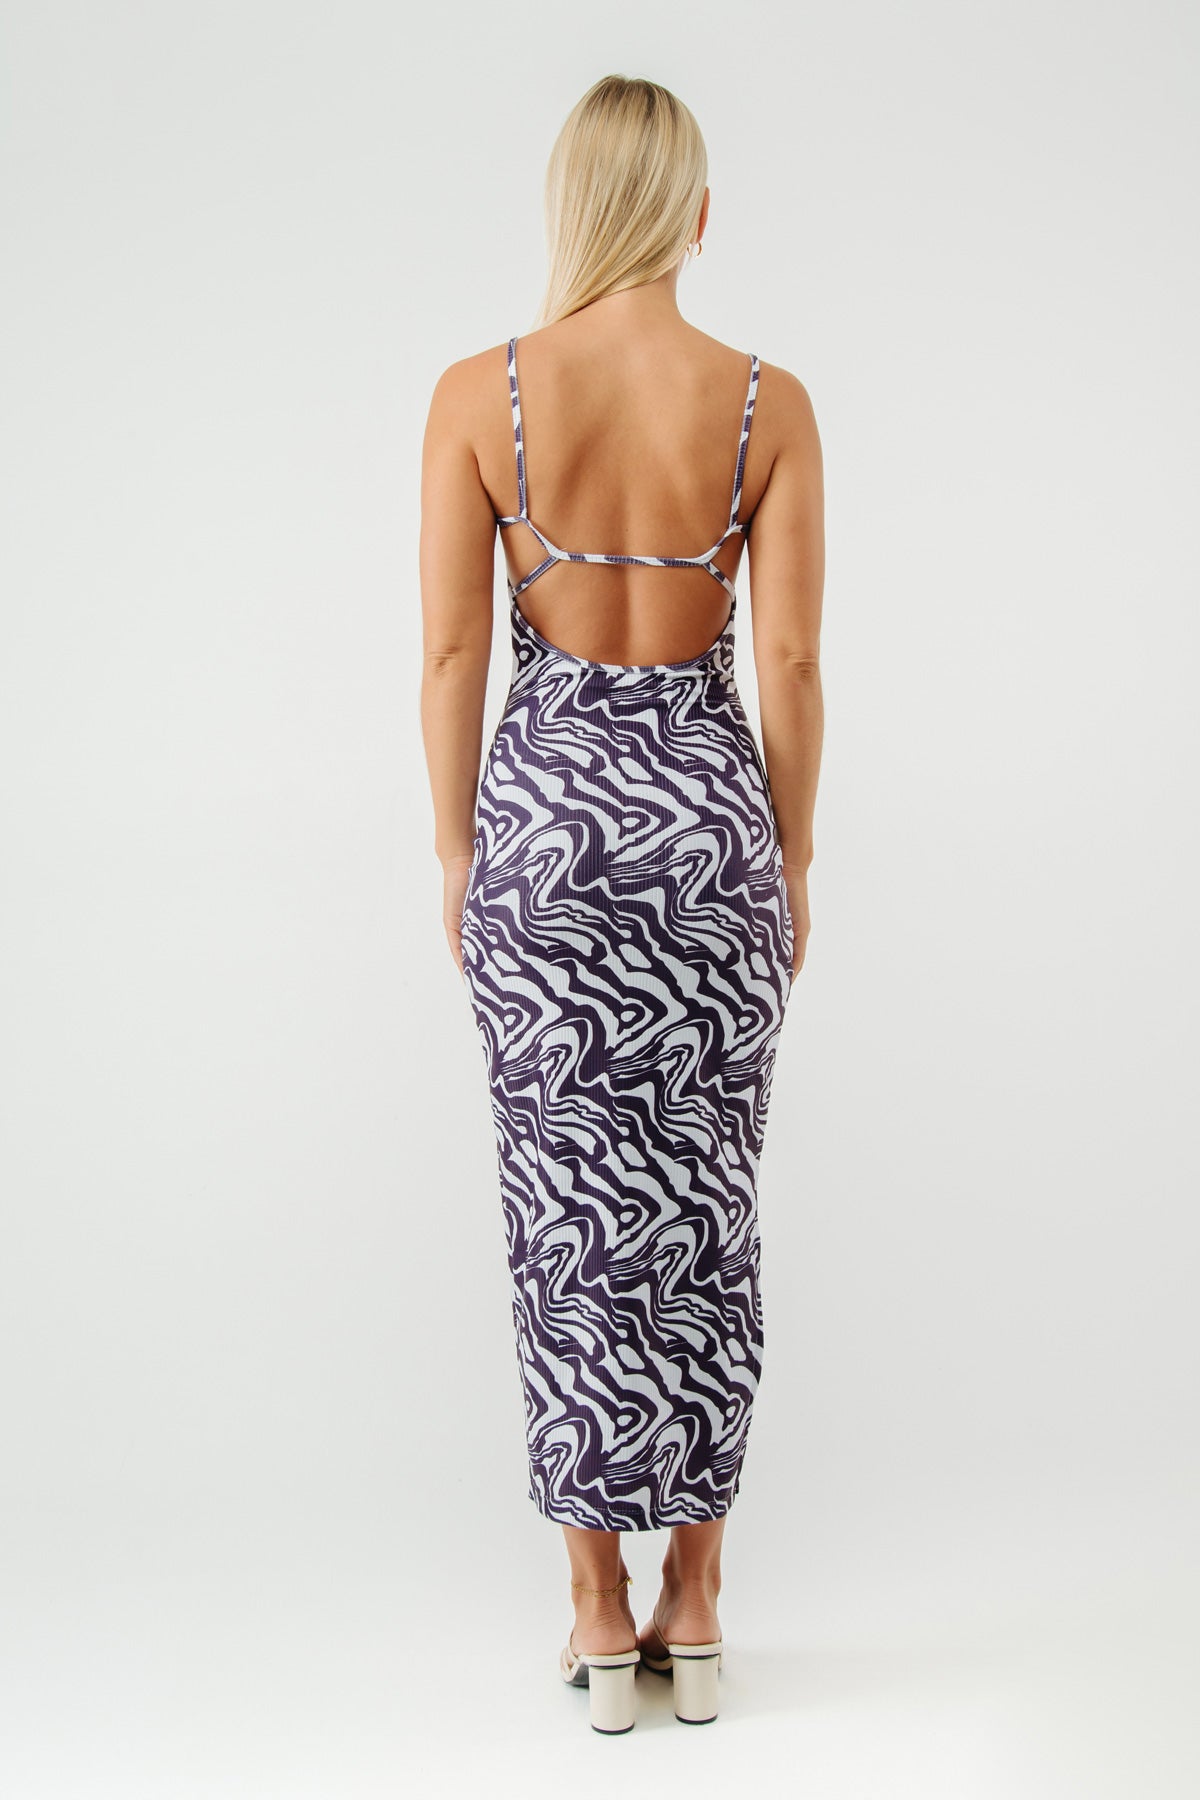 Pacific Dress Plum Psychedelic - APPAREL THIS IS A LOVE SONG